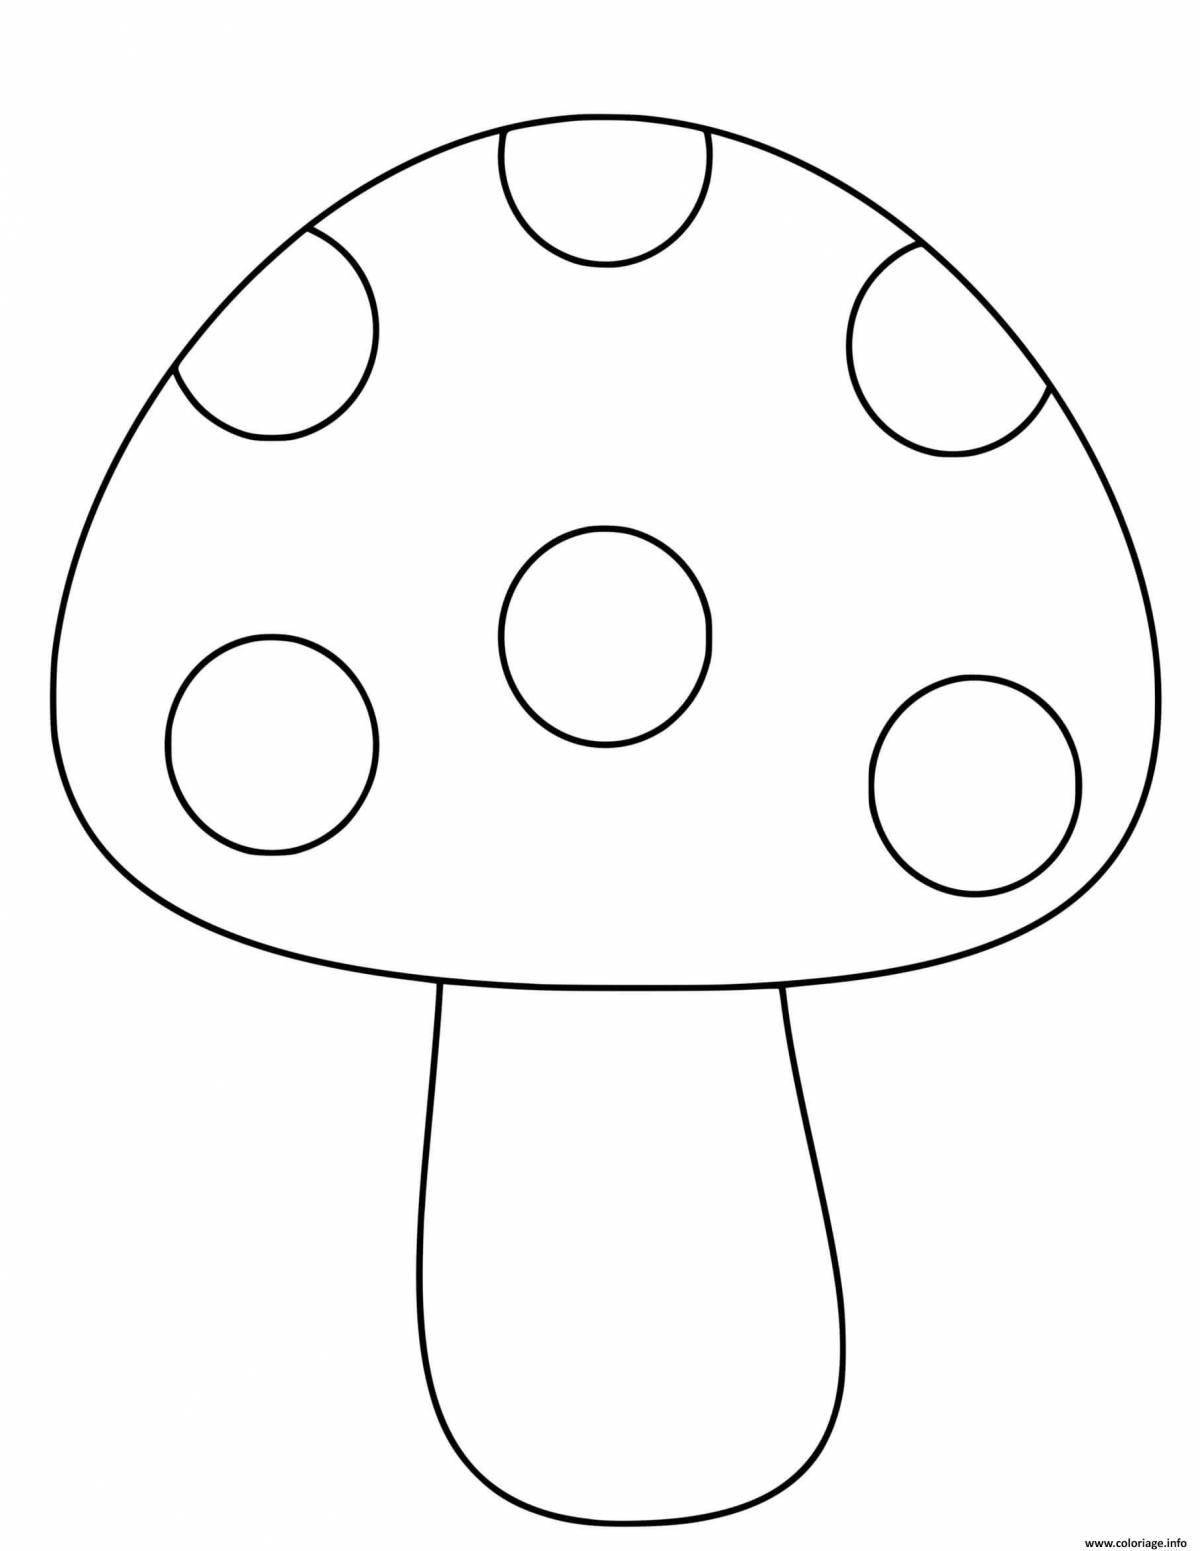 Exquisite fly agaric coloring book